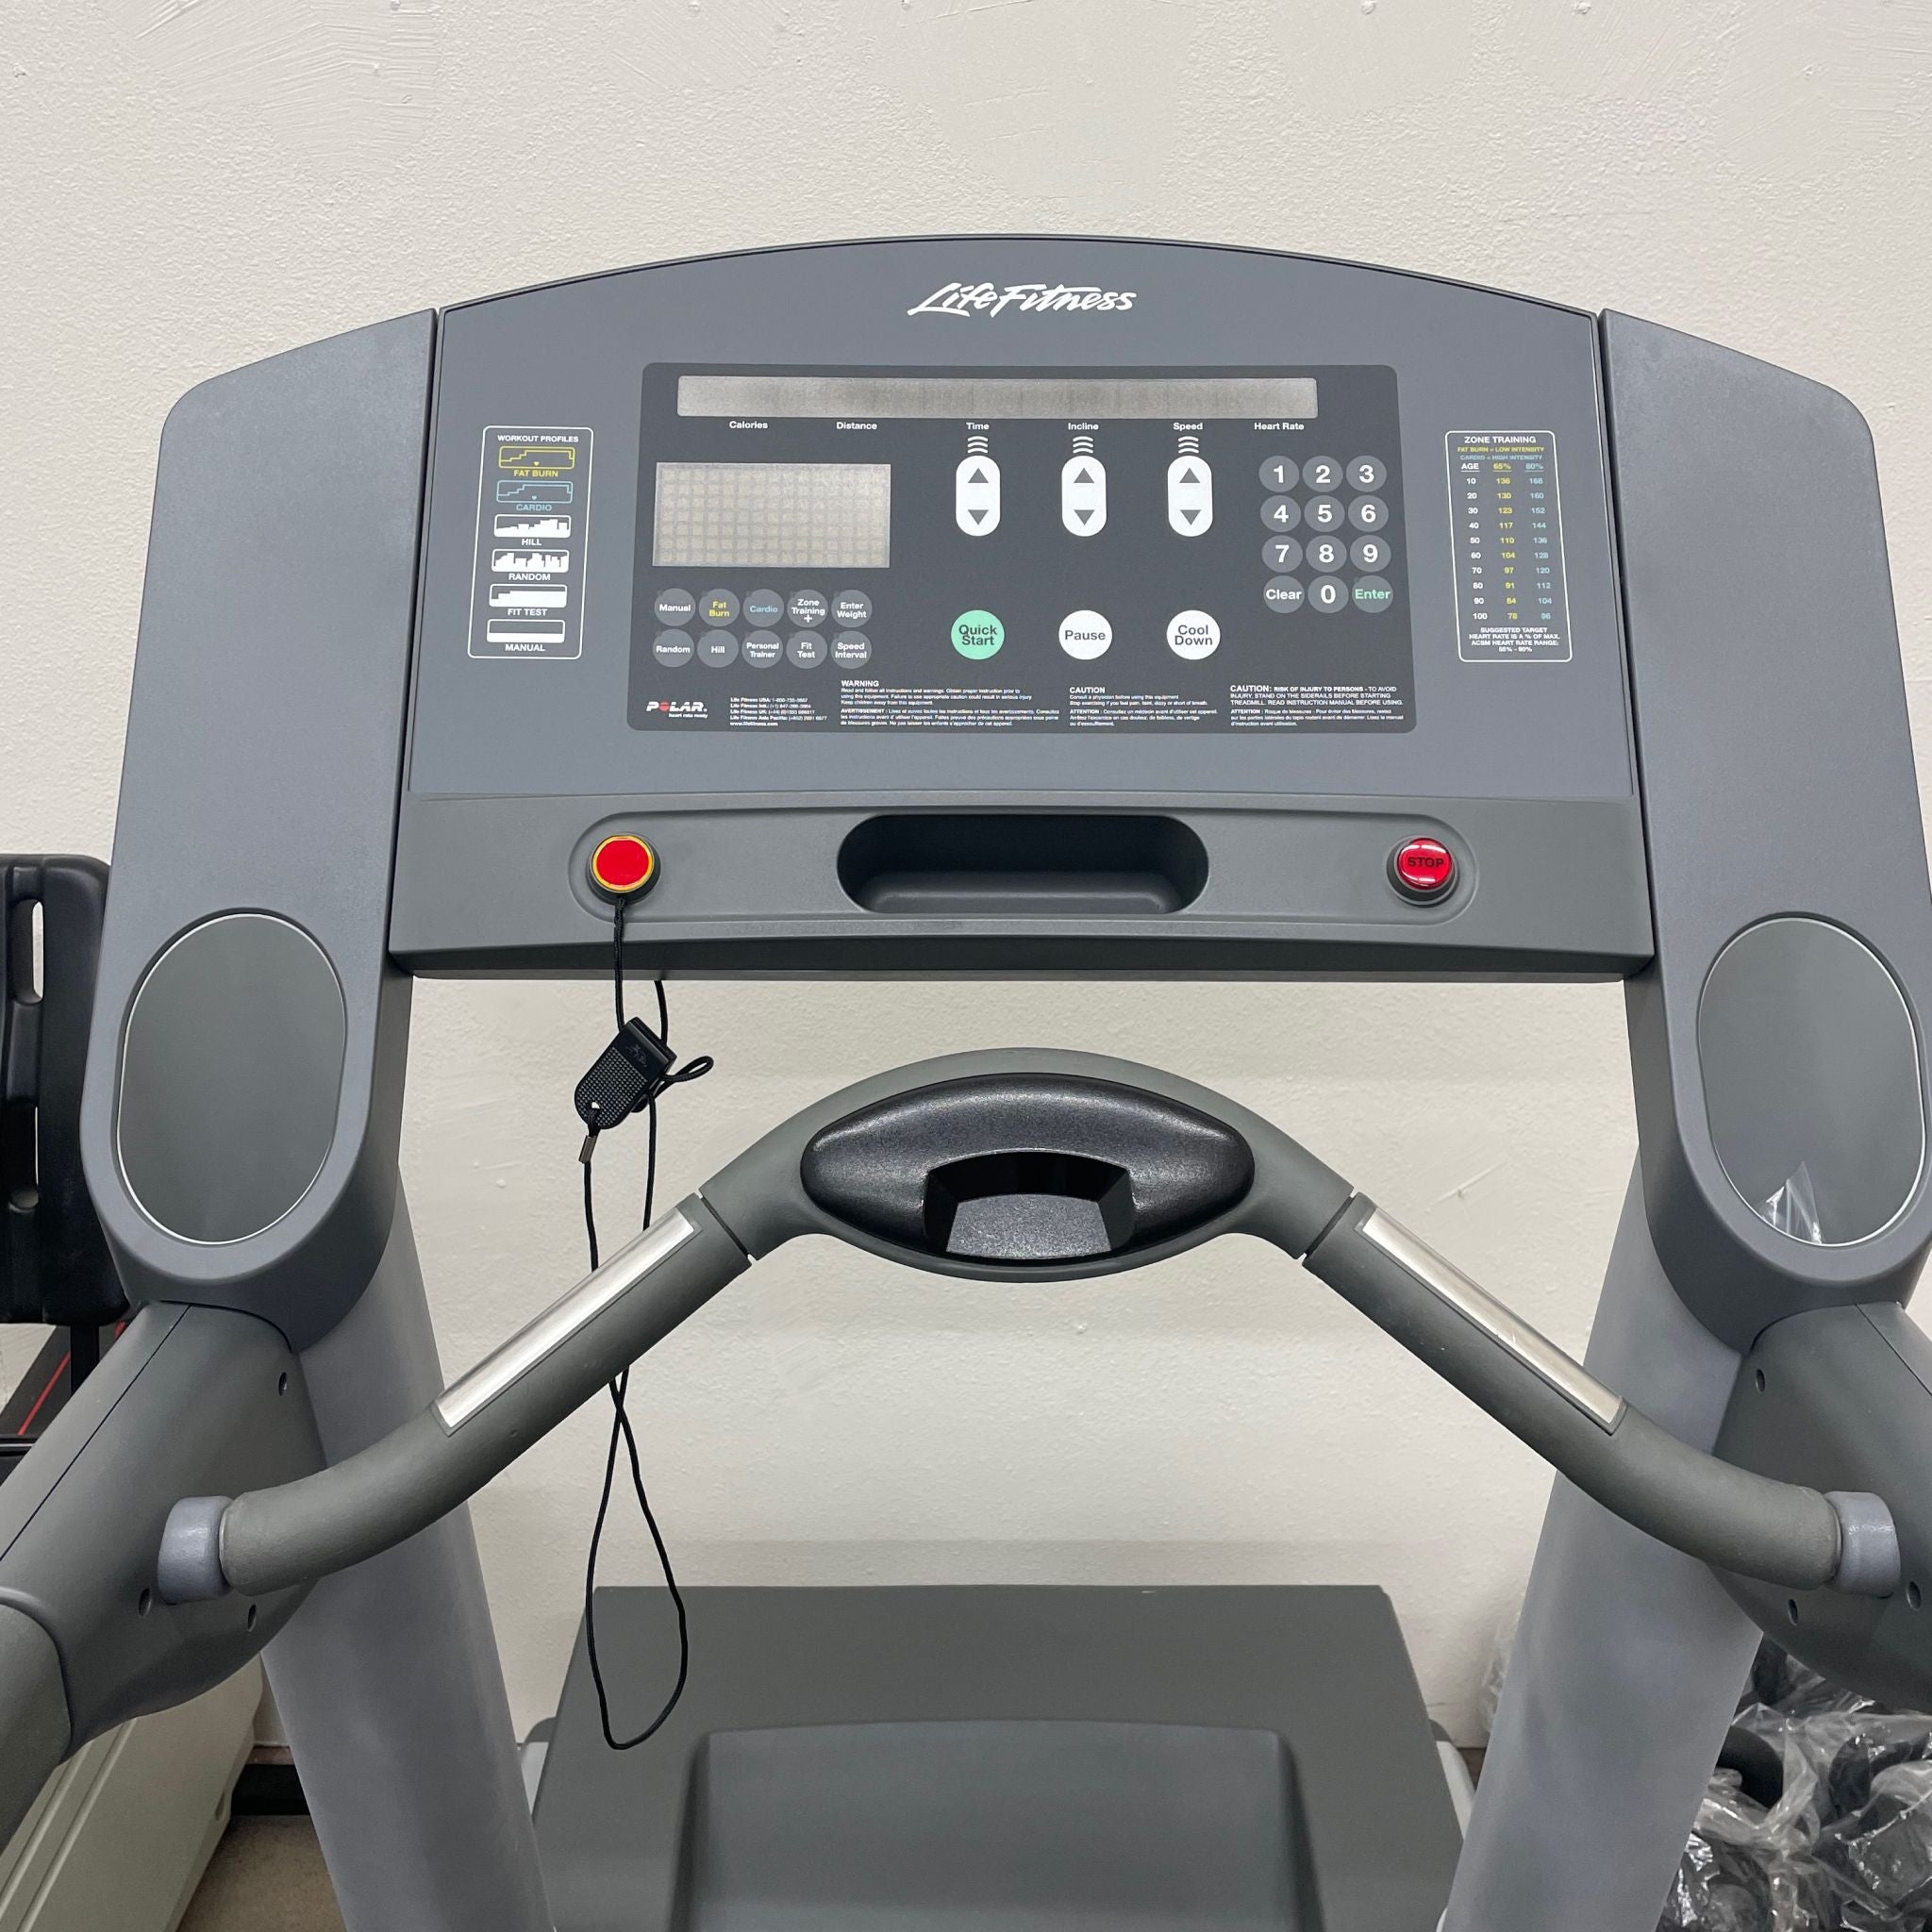 The multi-featured console on the Life Fitness 95Ti Treadmill